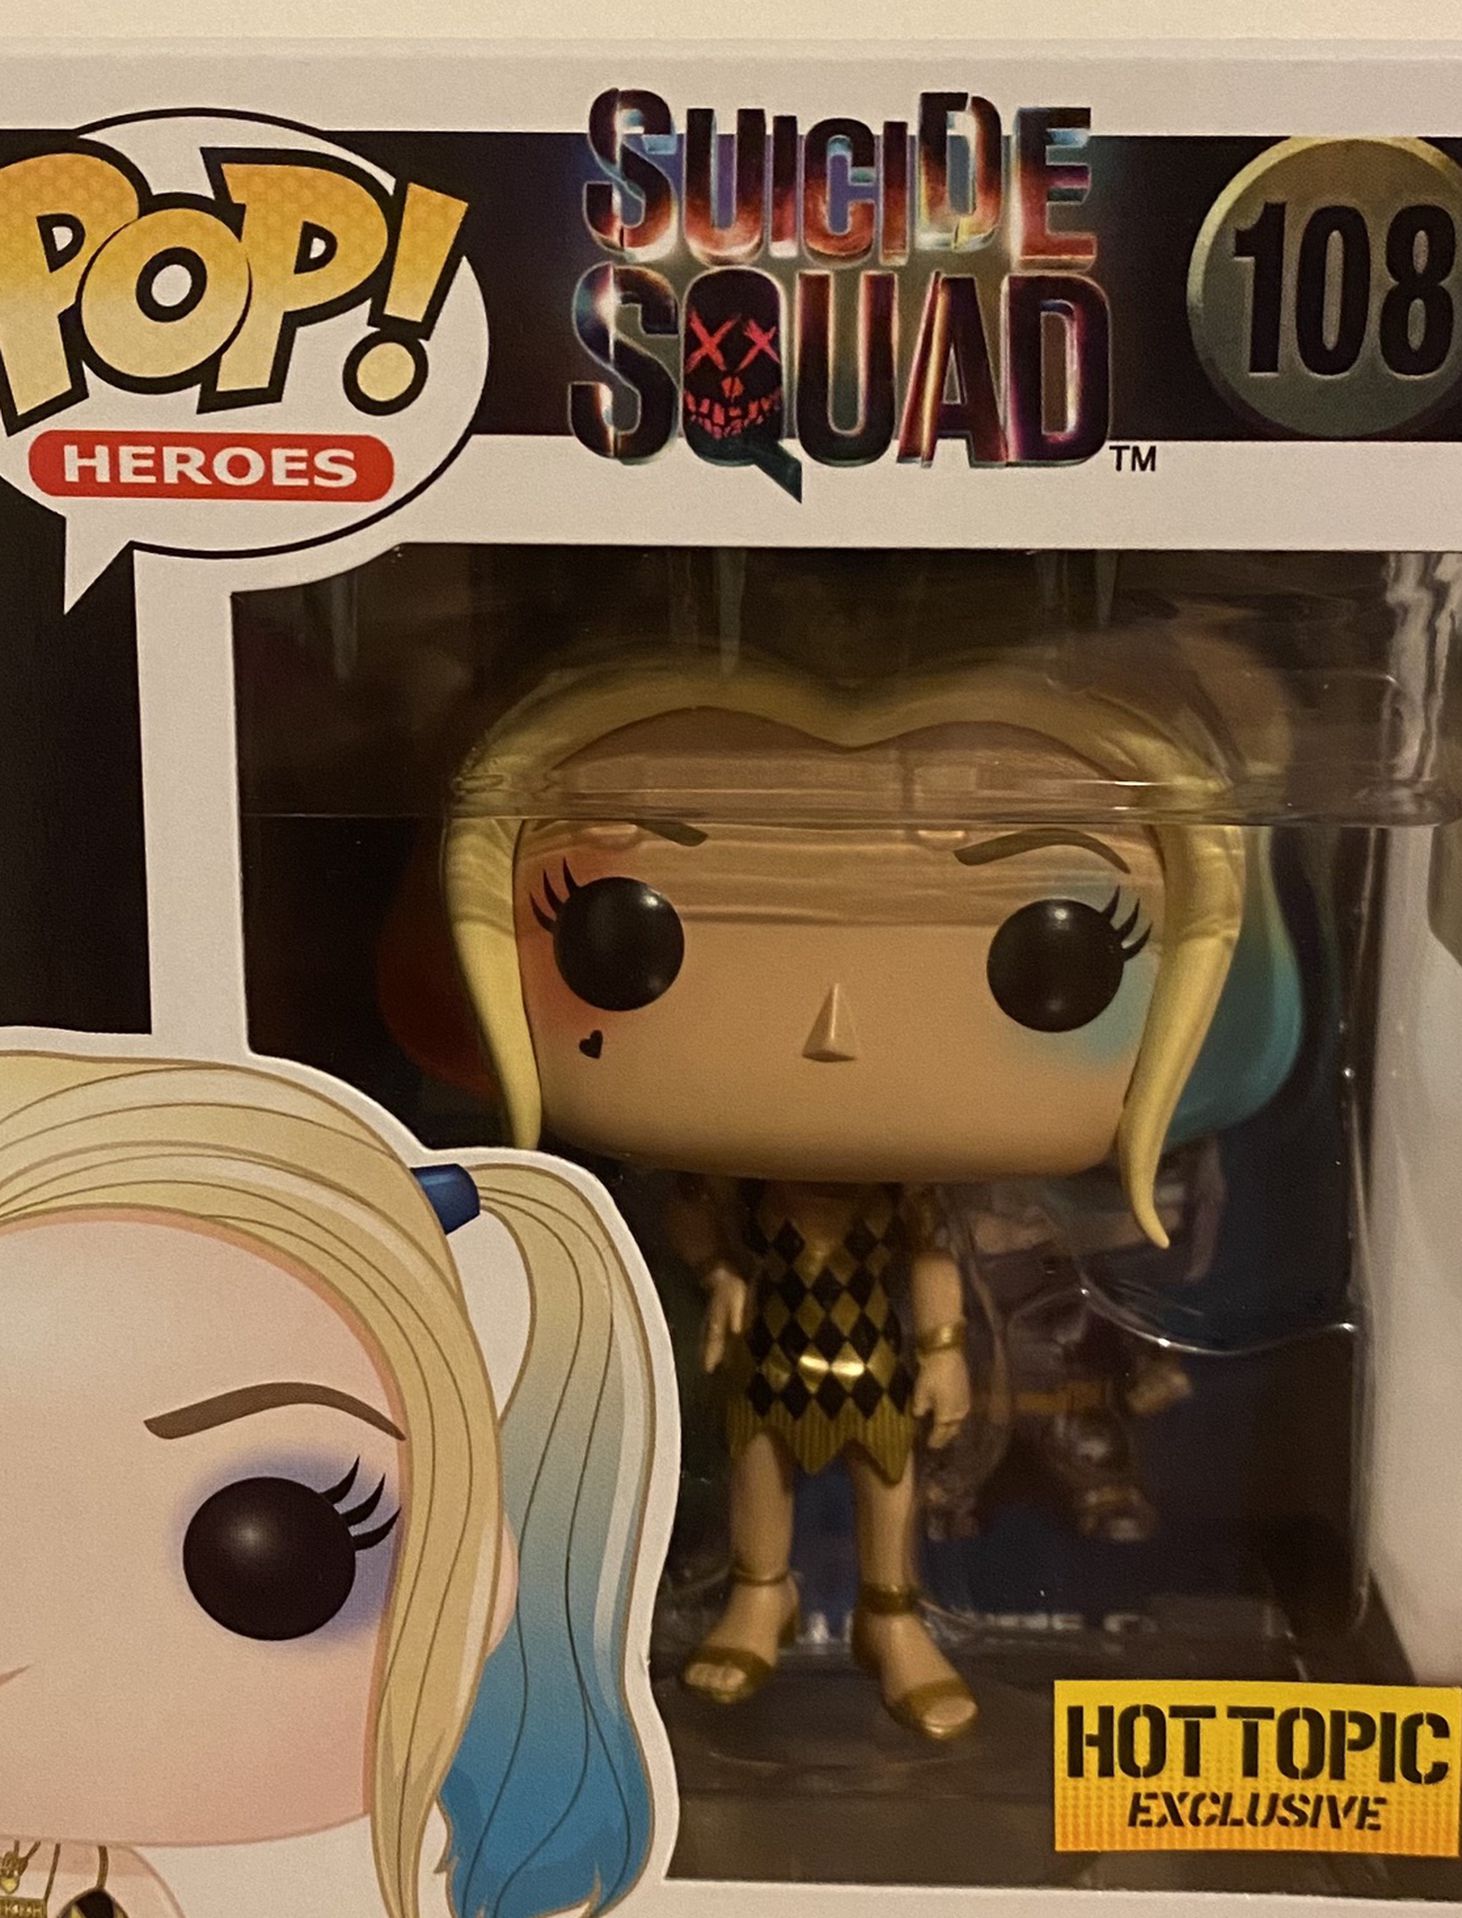 Harley Quinn “Hot Topic Excuslive” Pop #108